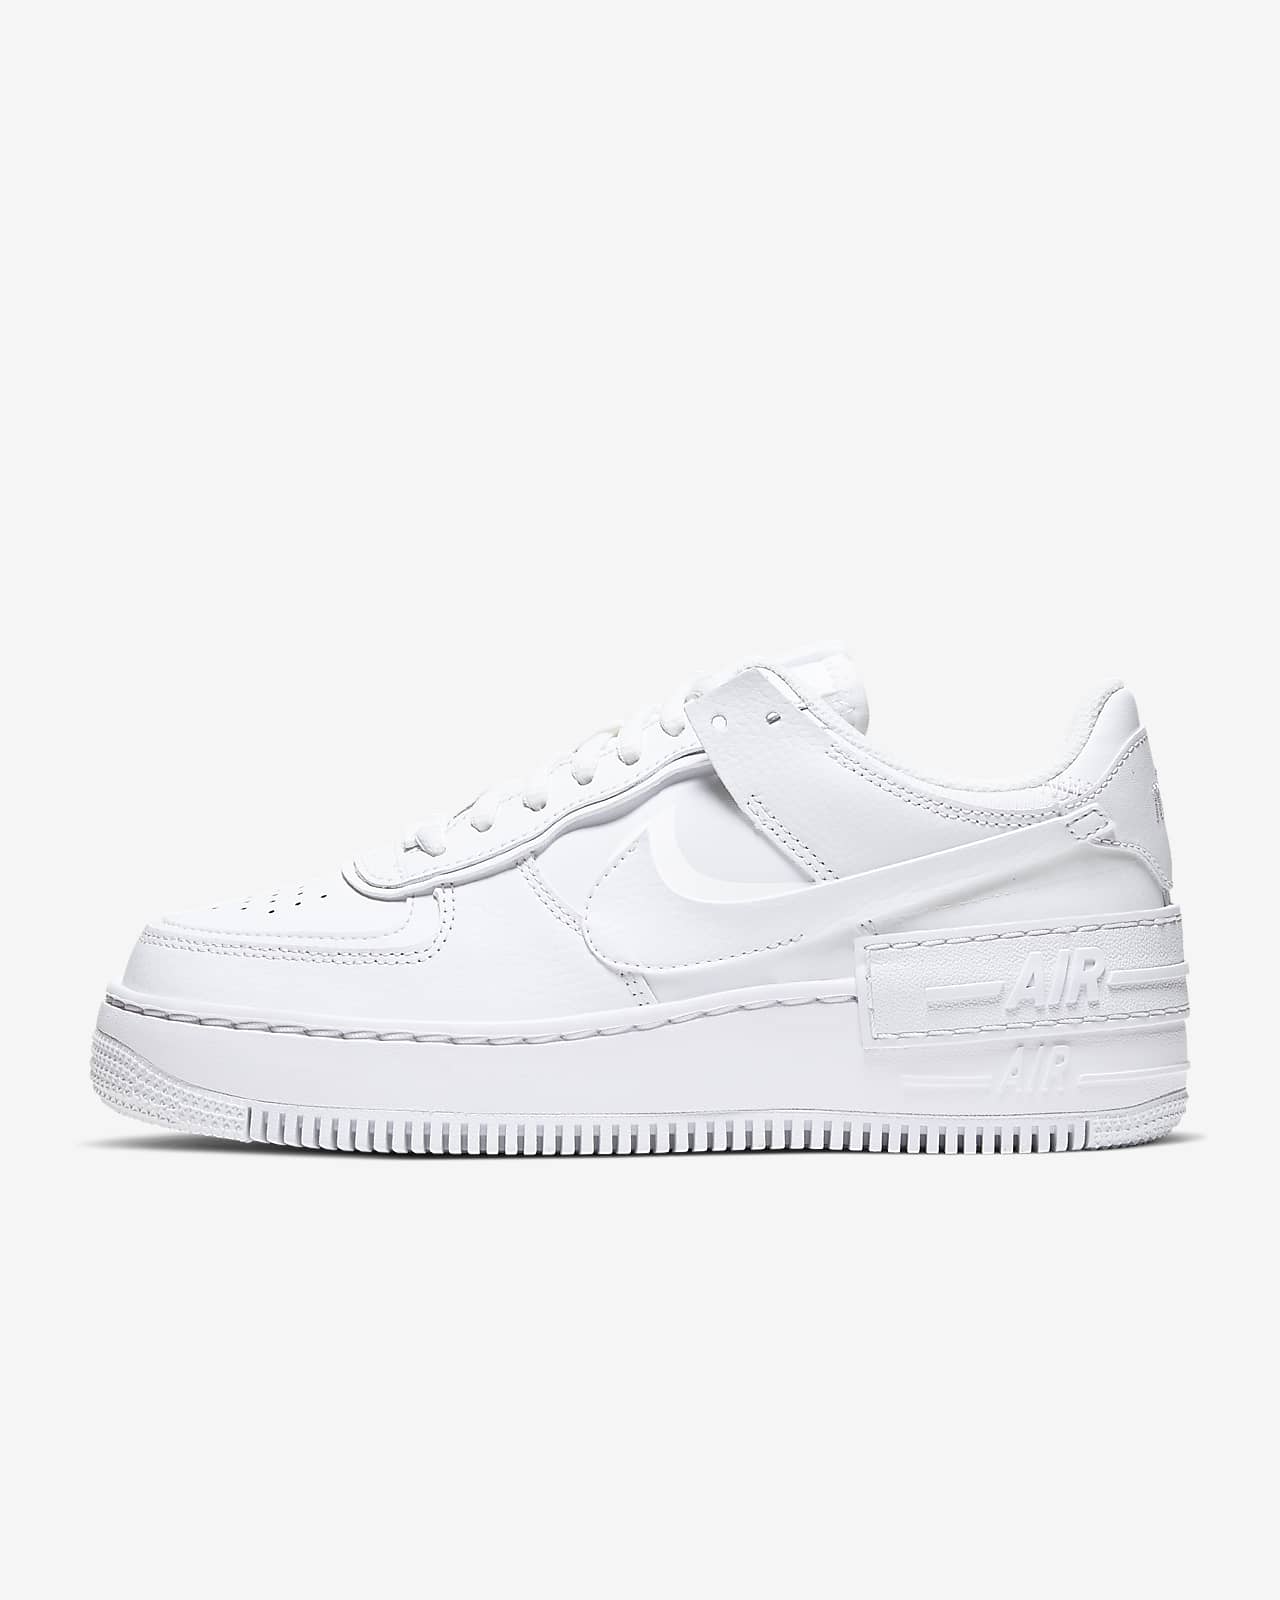 cheapest place to get air force 1